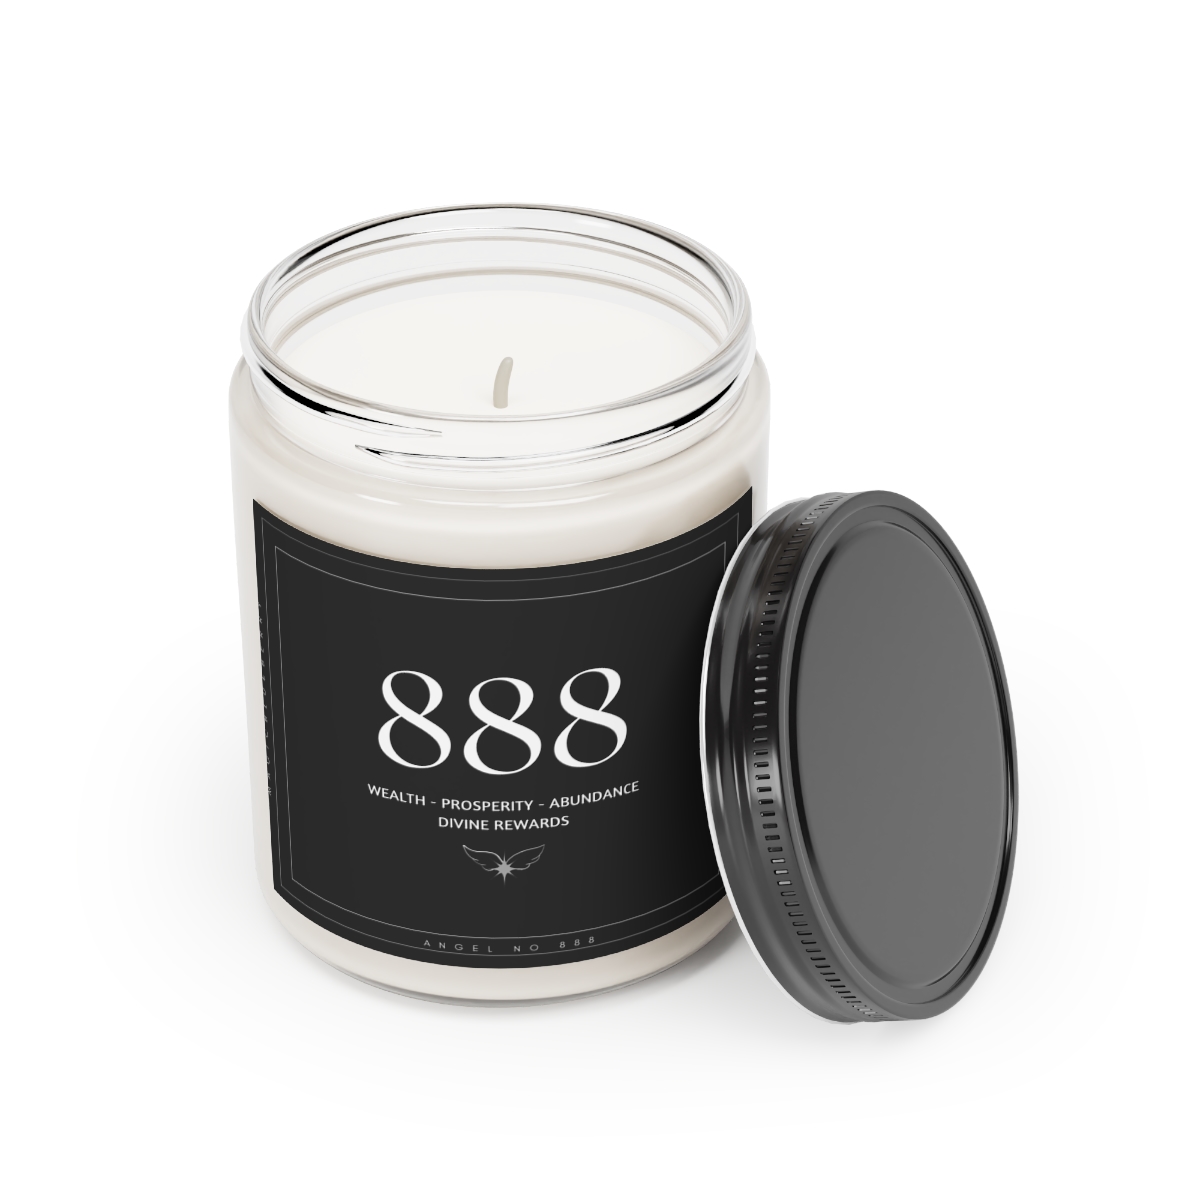 Angel Spell 888 - Scented Vegan Soy Wax Candles, Clear Jar Candle, Spell Candles, Sassy Candle, Vegan Candle, Cotton Wick Candle  product thumbnail image